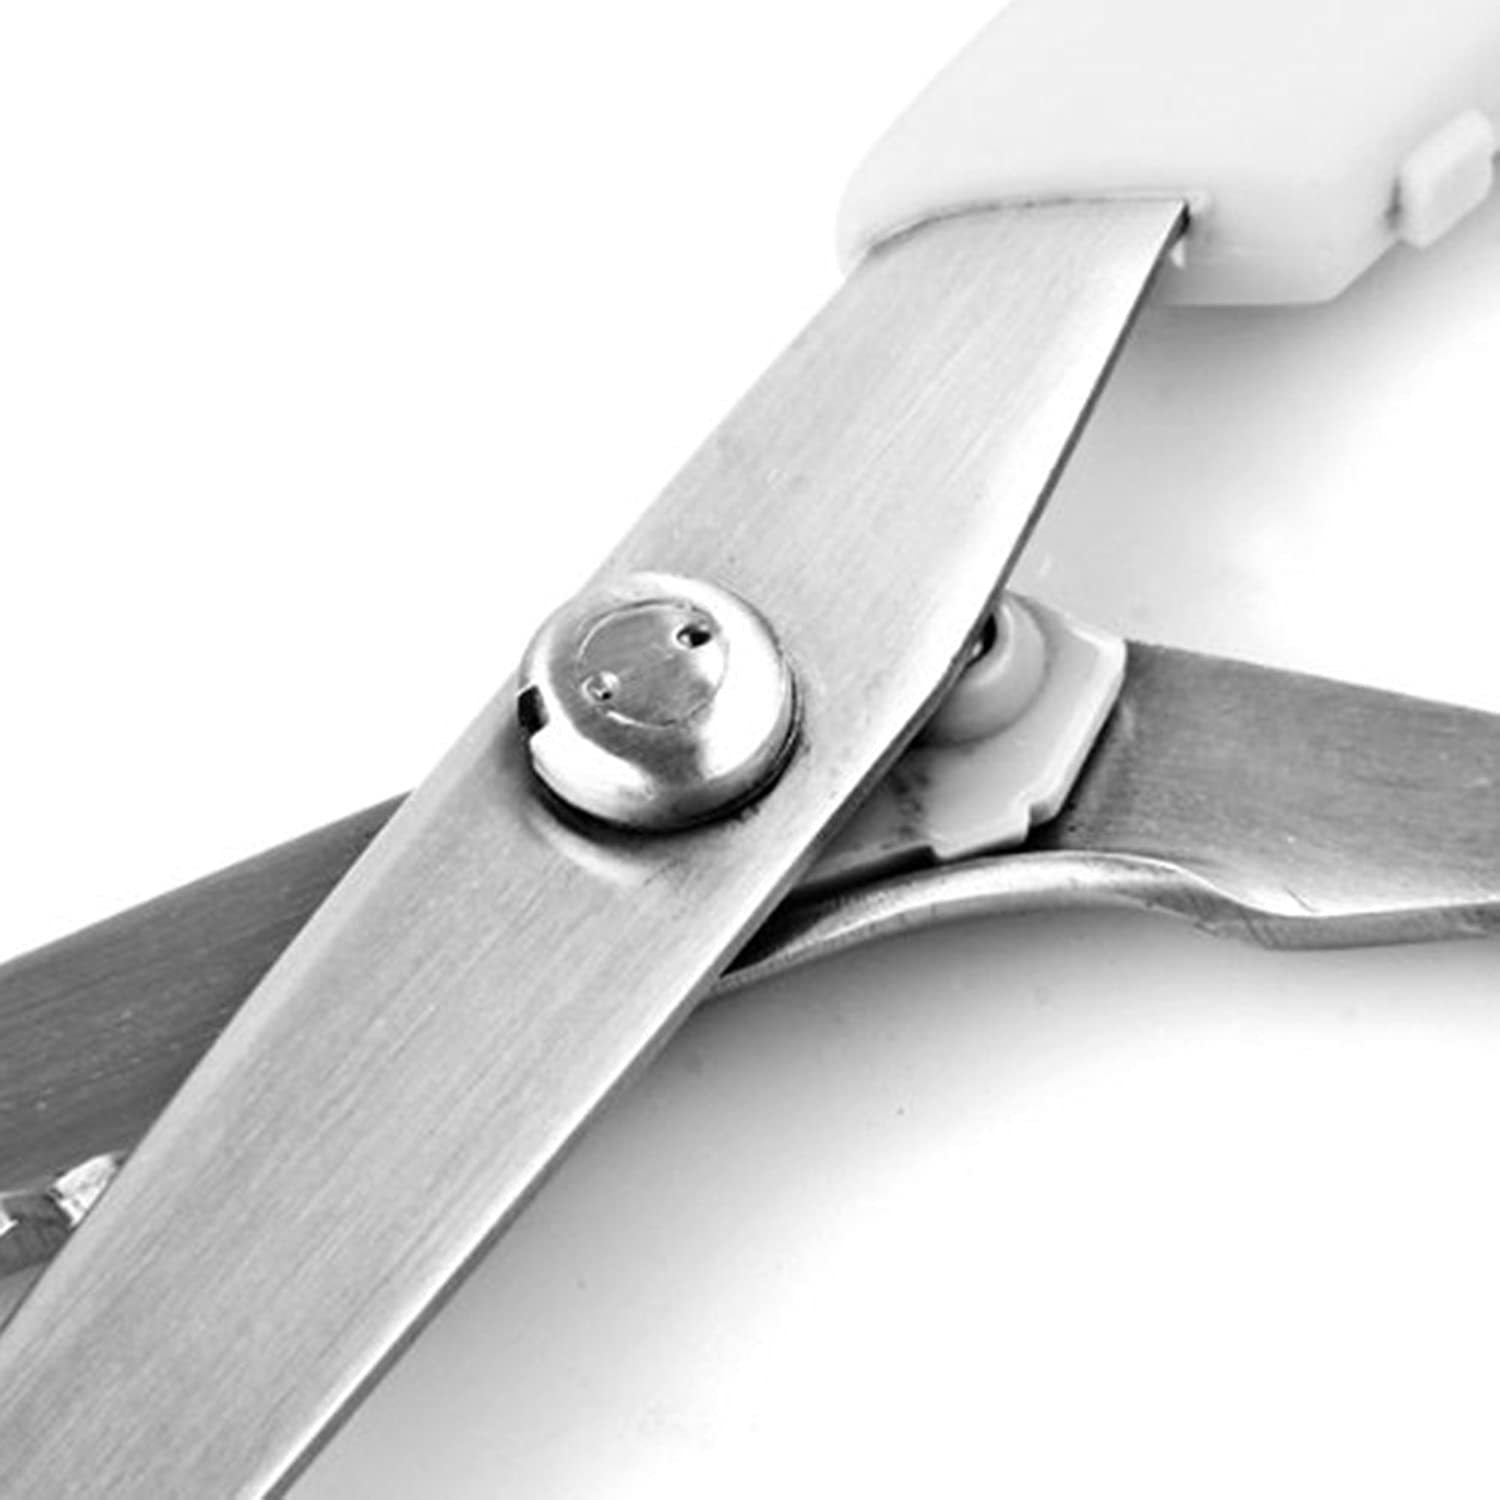 Stainless Steel Pinking Shears Comfort Grip Handled Professional